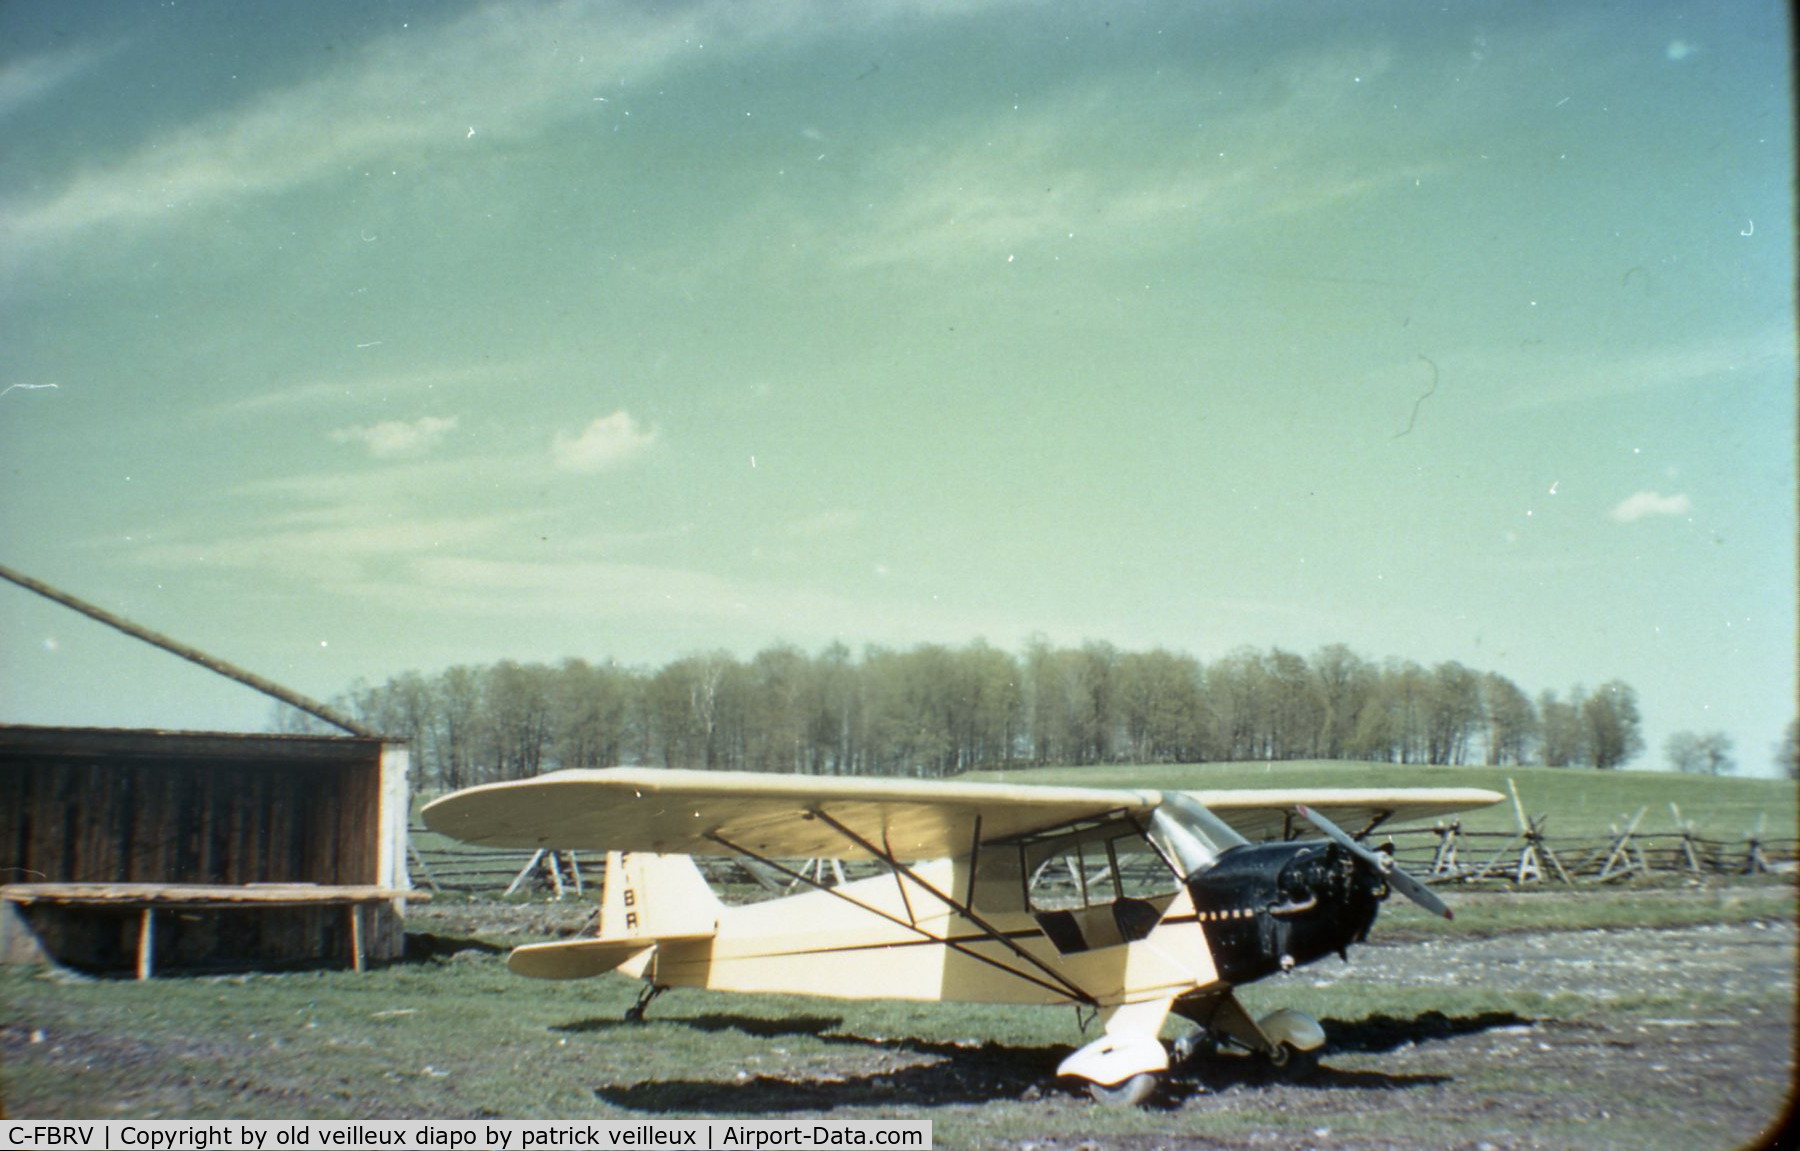 C-FBRV, 1946 Piper J3C-65 Cub Cub C/N 120C, picture taken in compton, quebec, canada un the early 60's. my grand father was the co-owner back then